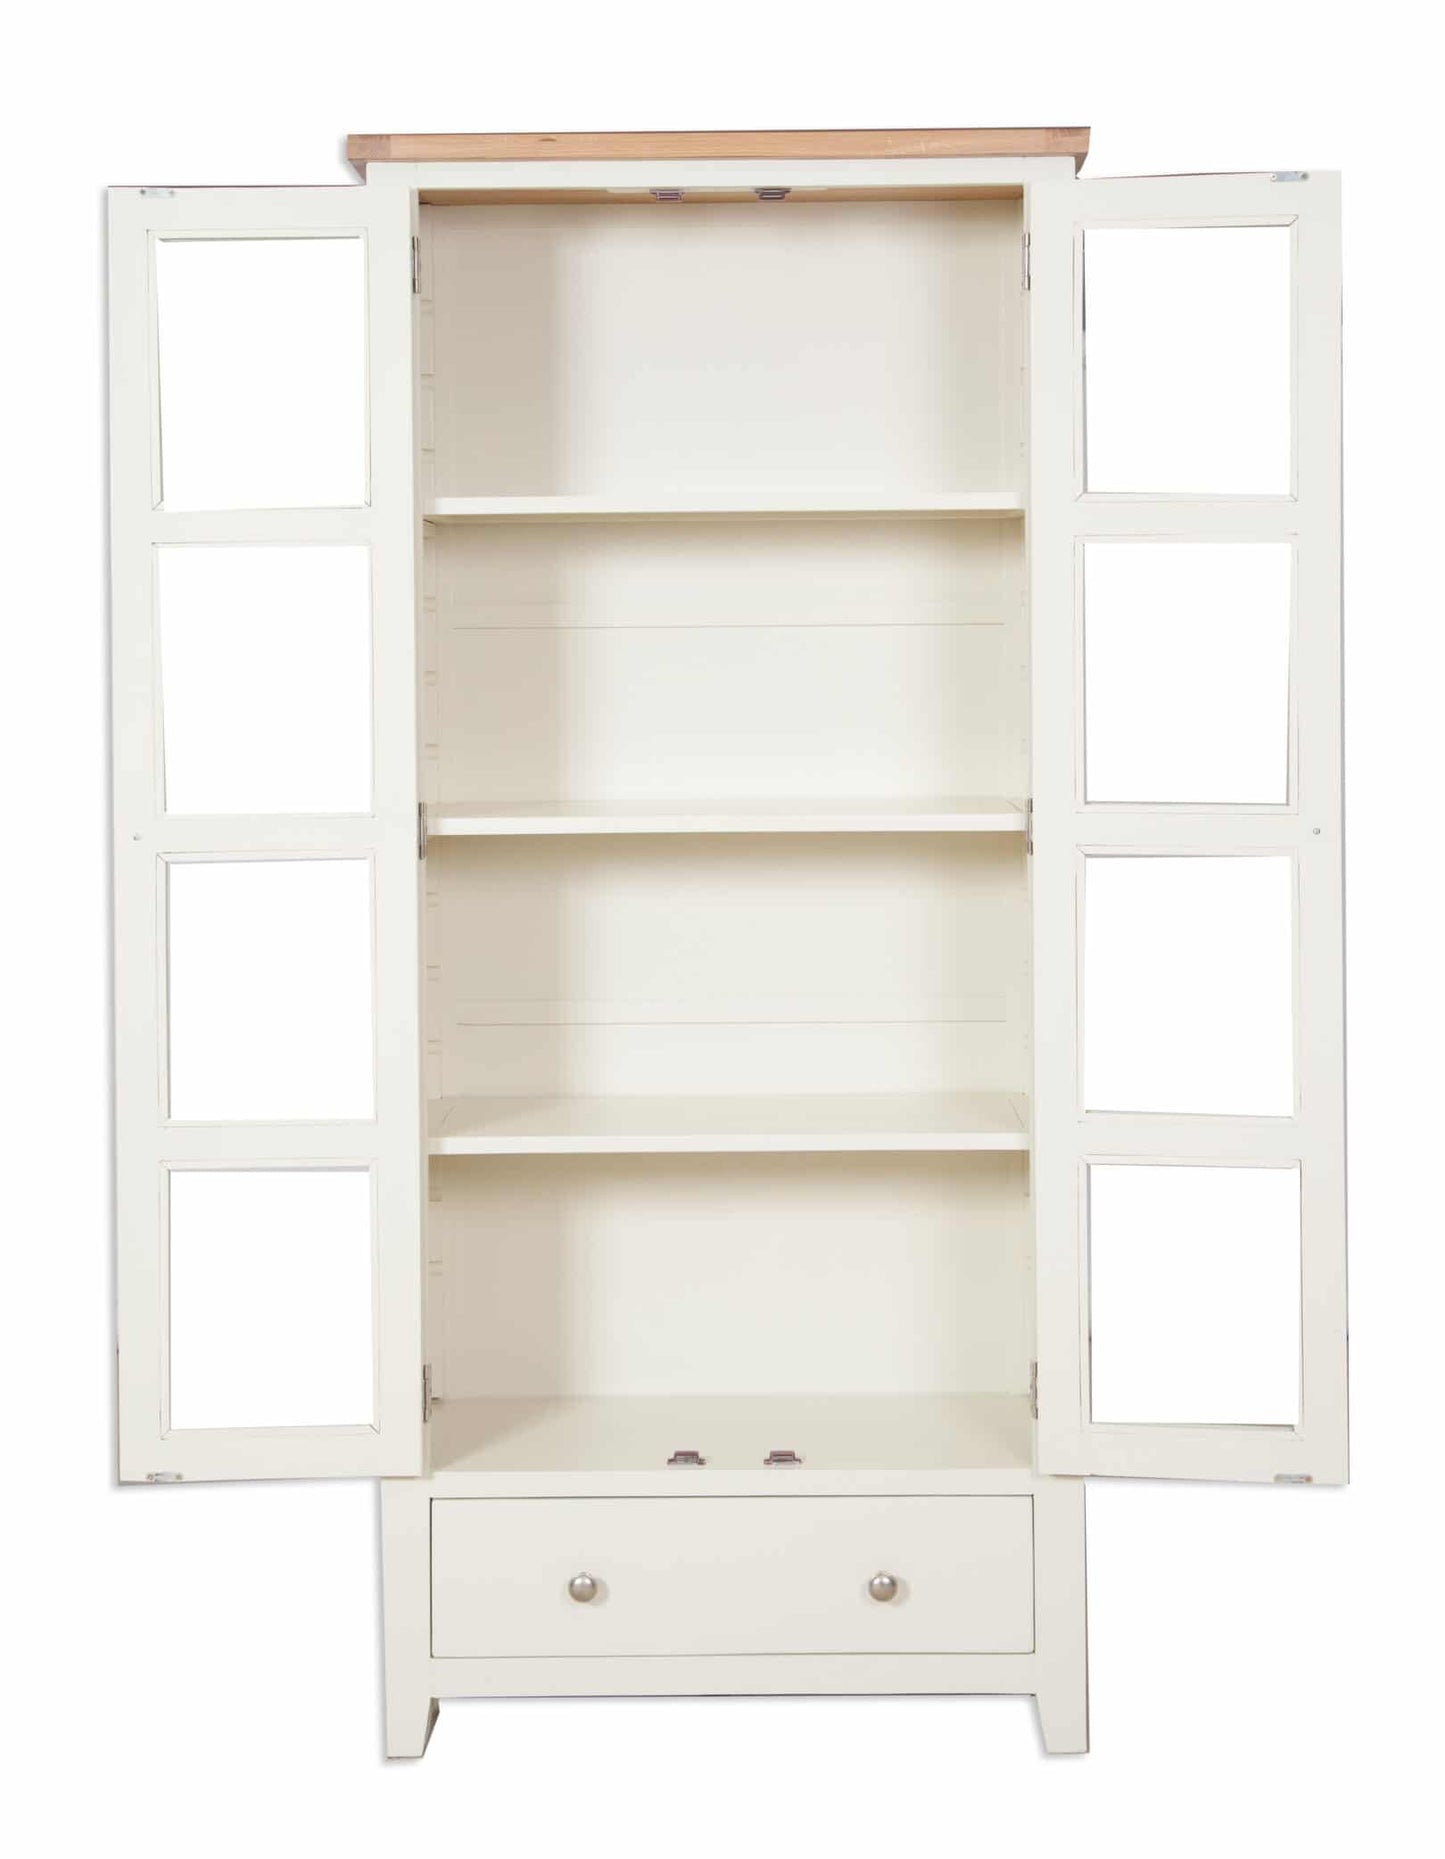 French Ivory Cream Painted Display Cabinet 2 Door 1 Drawer